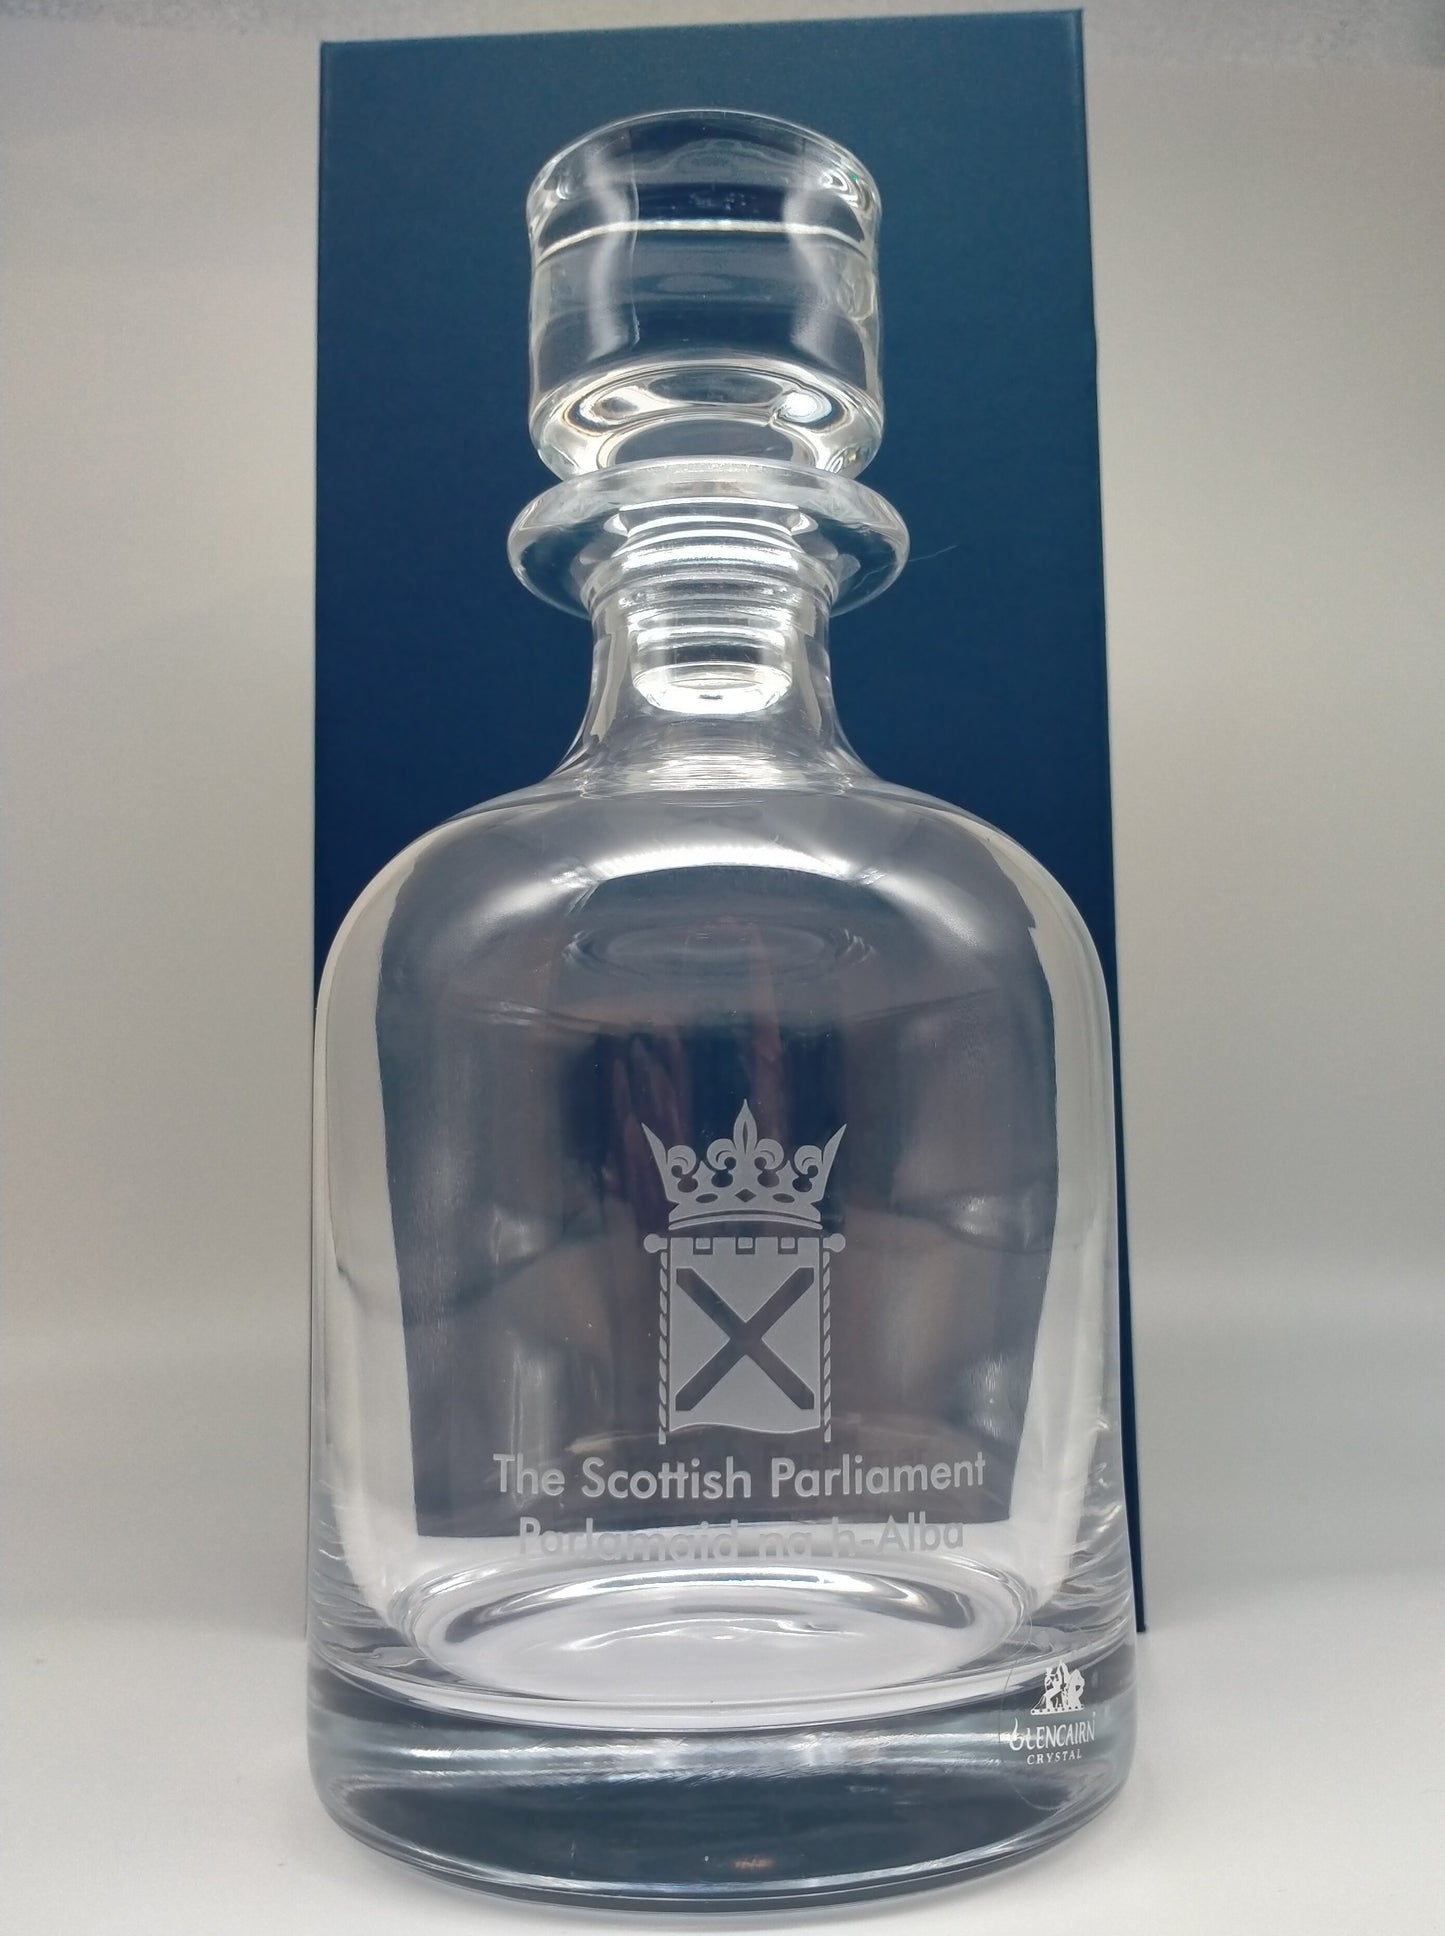 A crystal decanter engraved with the symbol of the Scottish Parliament in front of blue box.